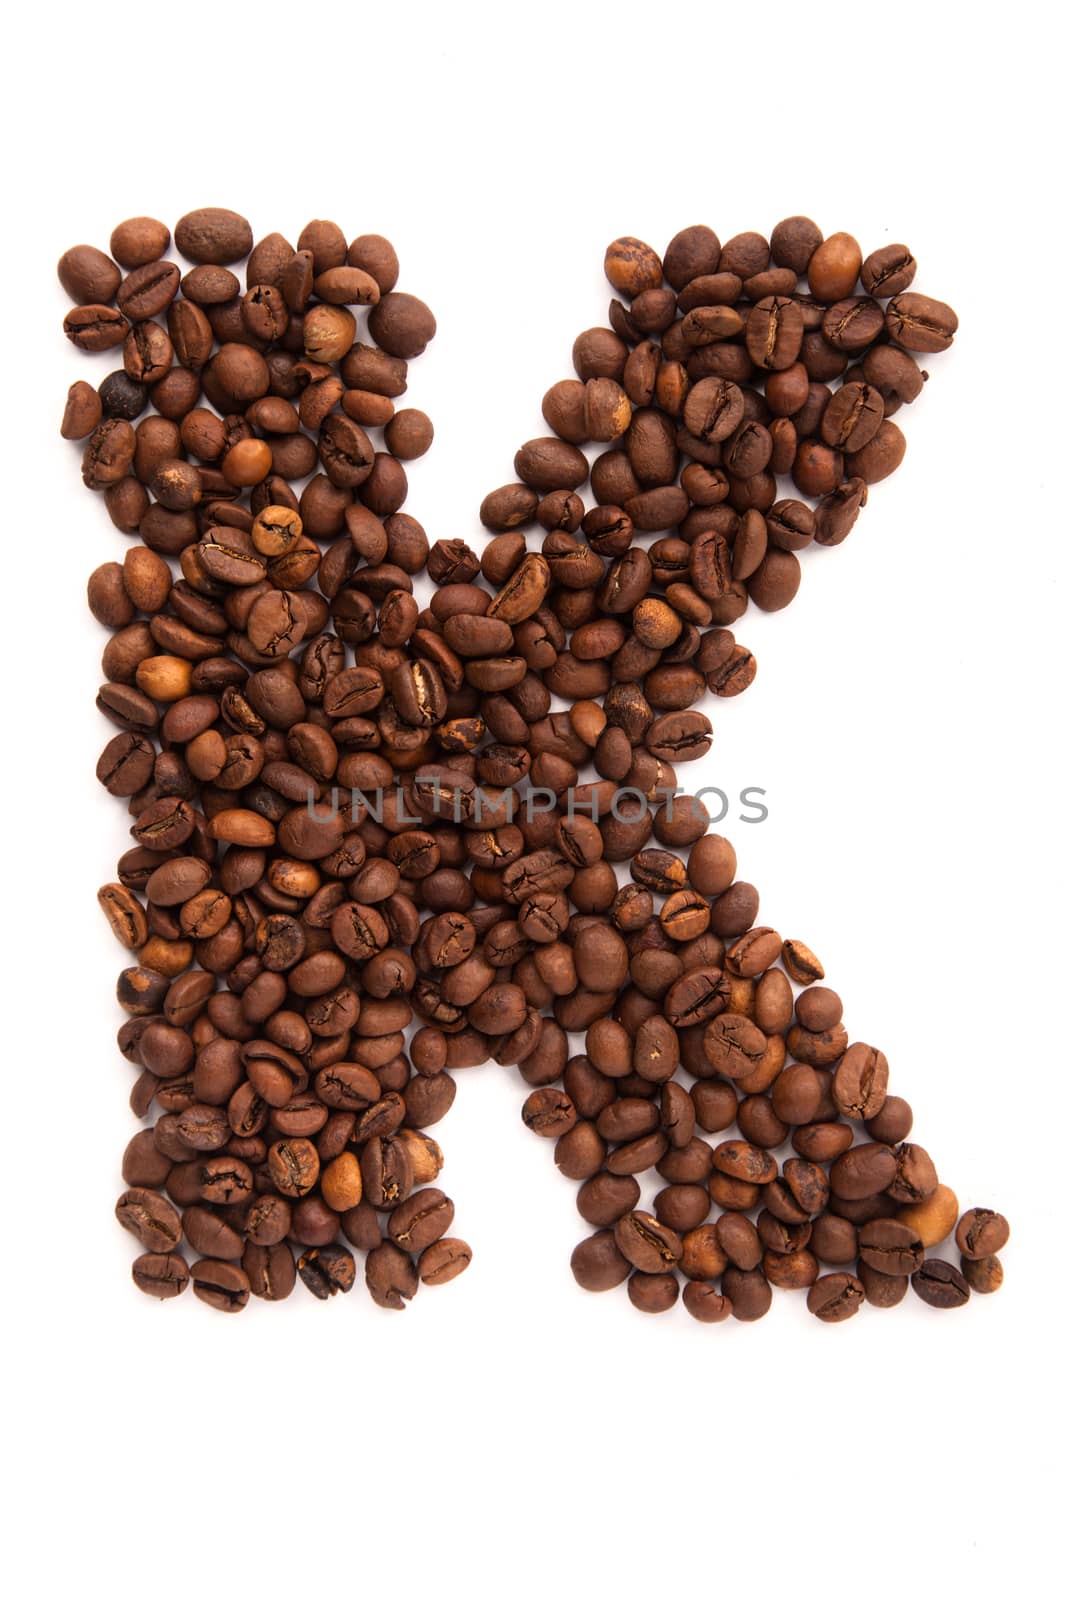 Alphabet letter K of roasted coffee beans isolated on white background by traza